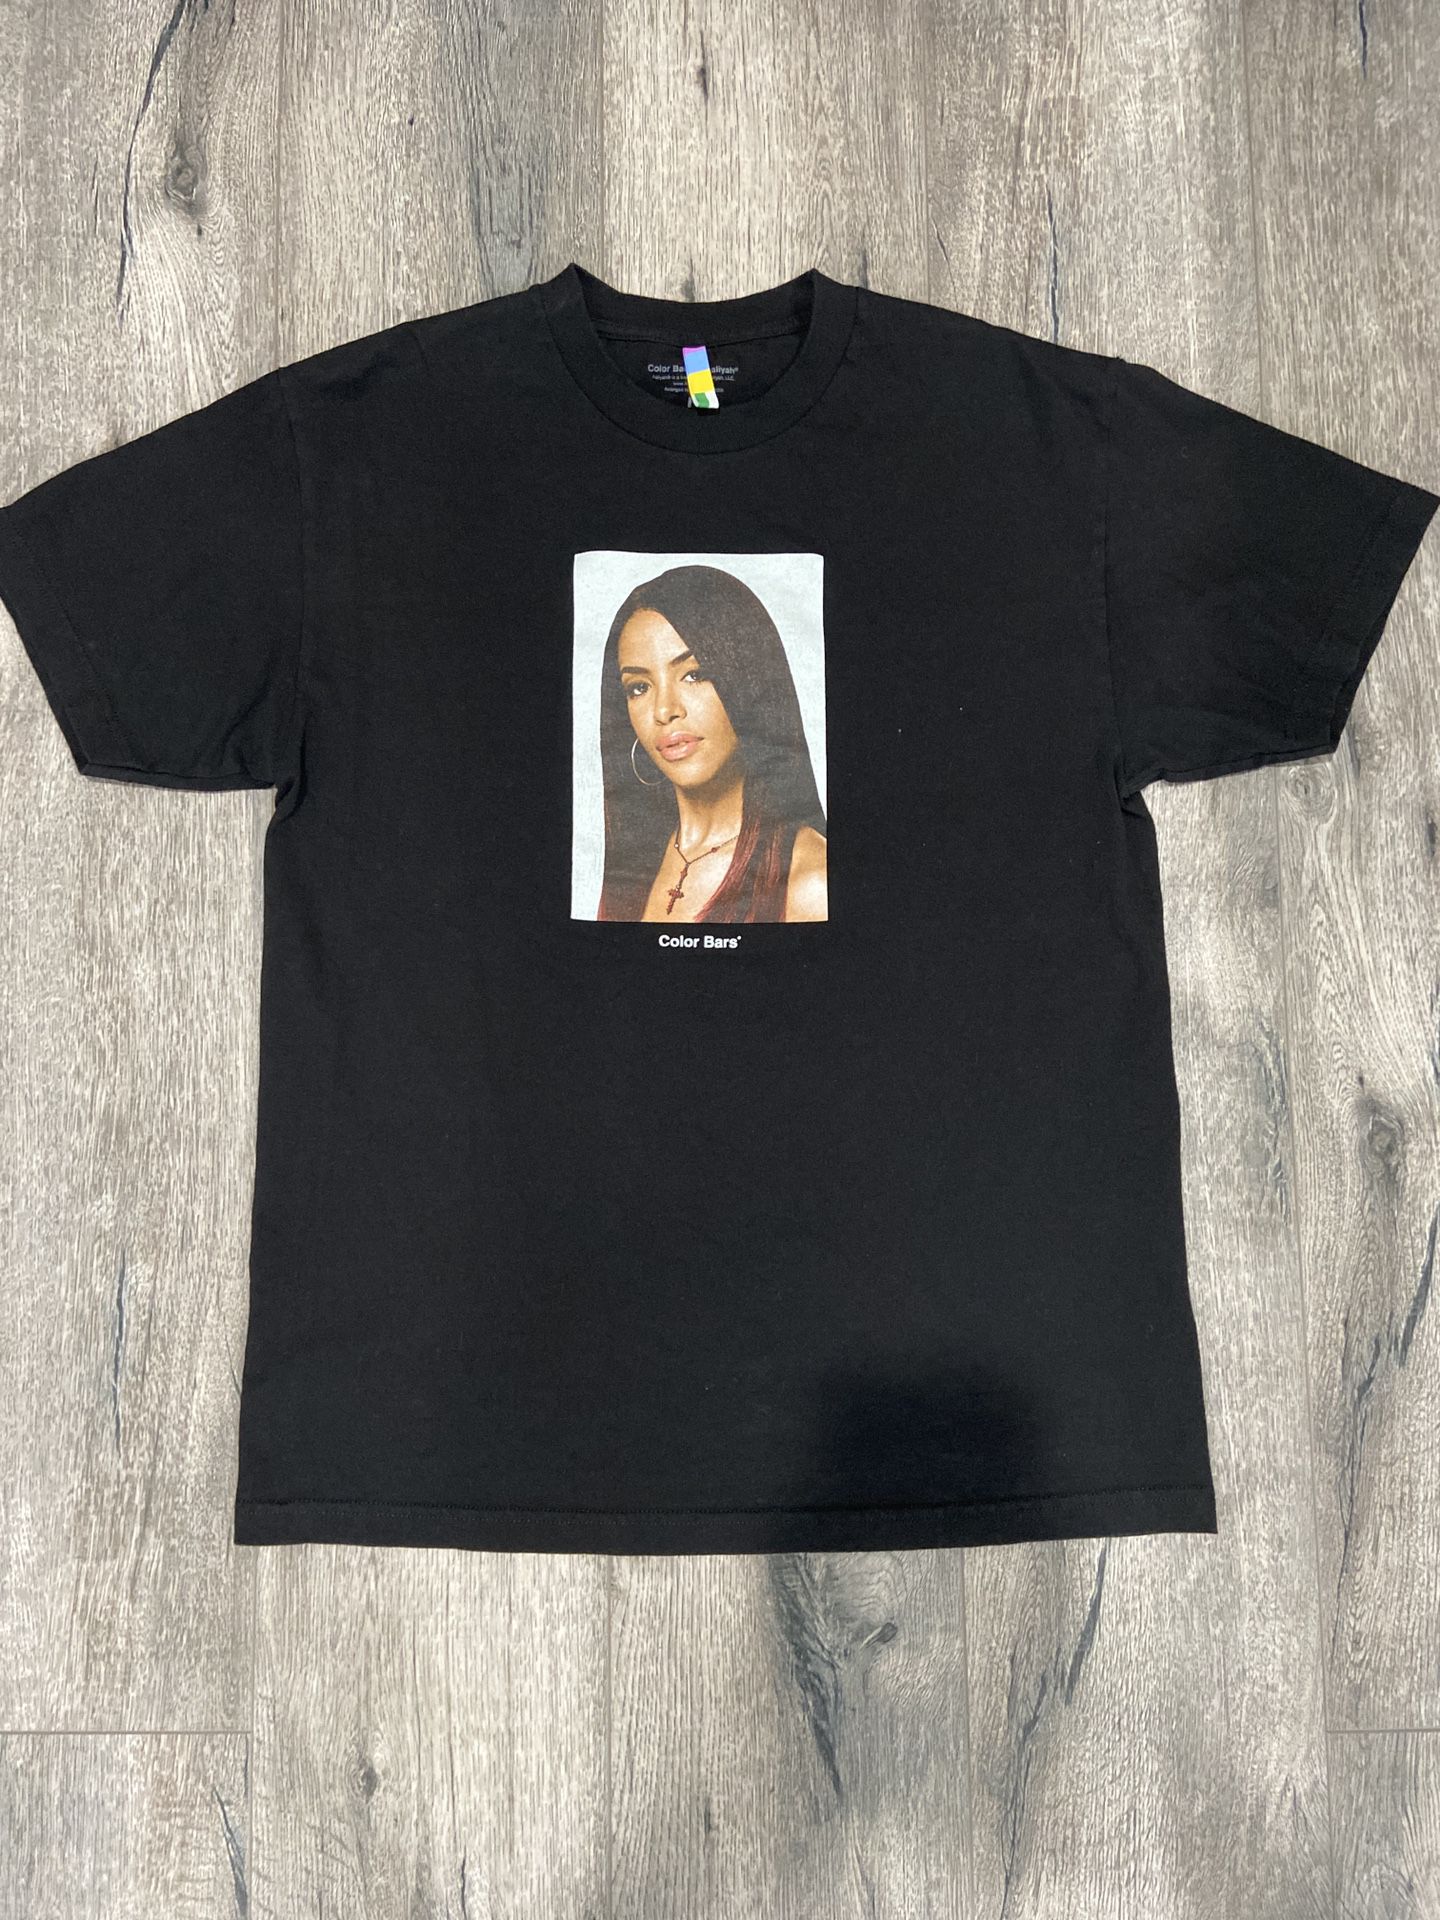 Aaliyah Color Bars T Shirt Black Size Large SUPER LIMITED  